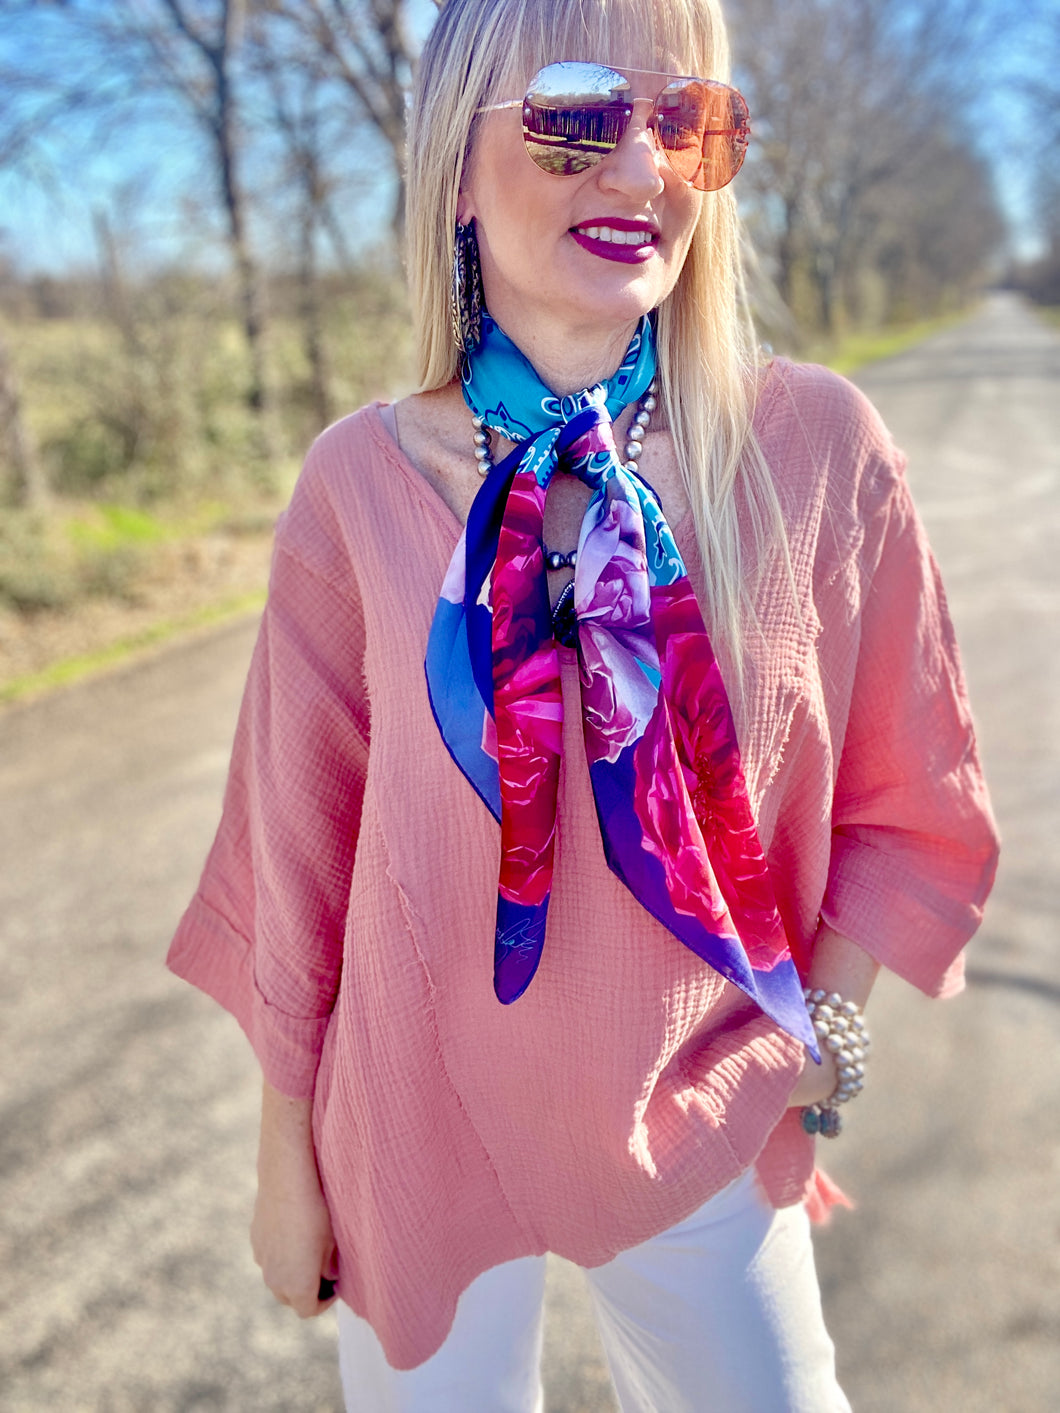 The pink pixie blouse